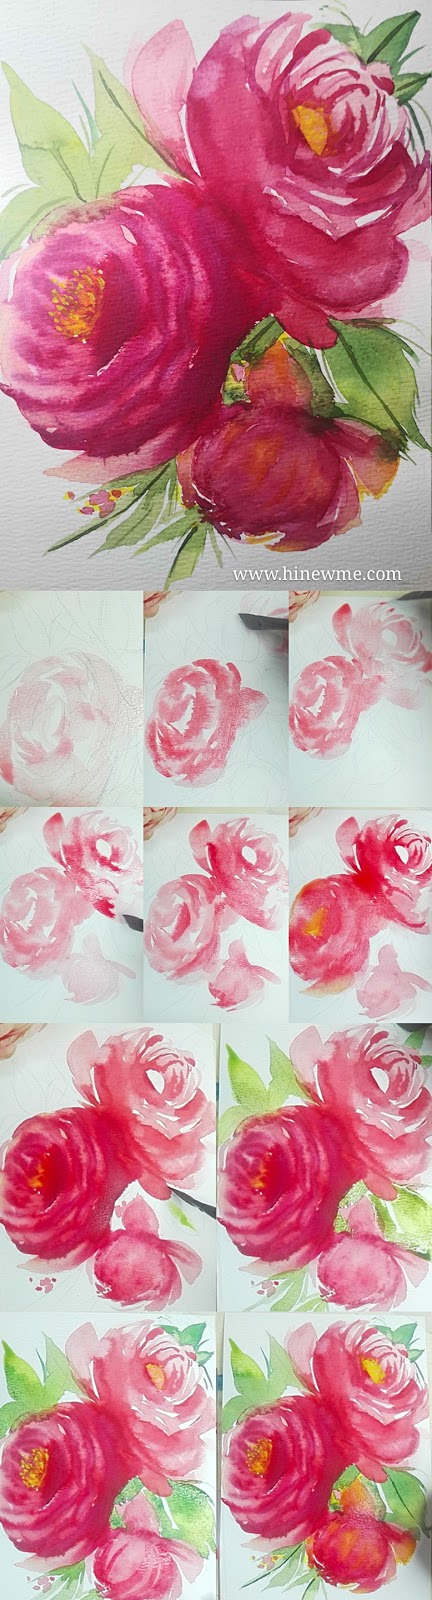 How to draw red peony with watercolor step by step tutorial